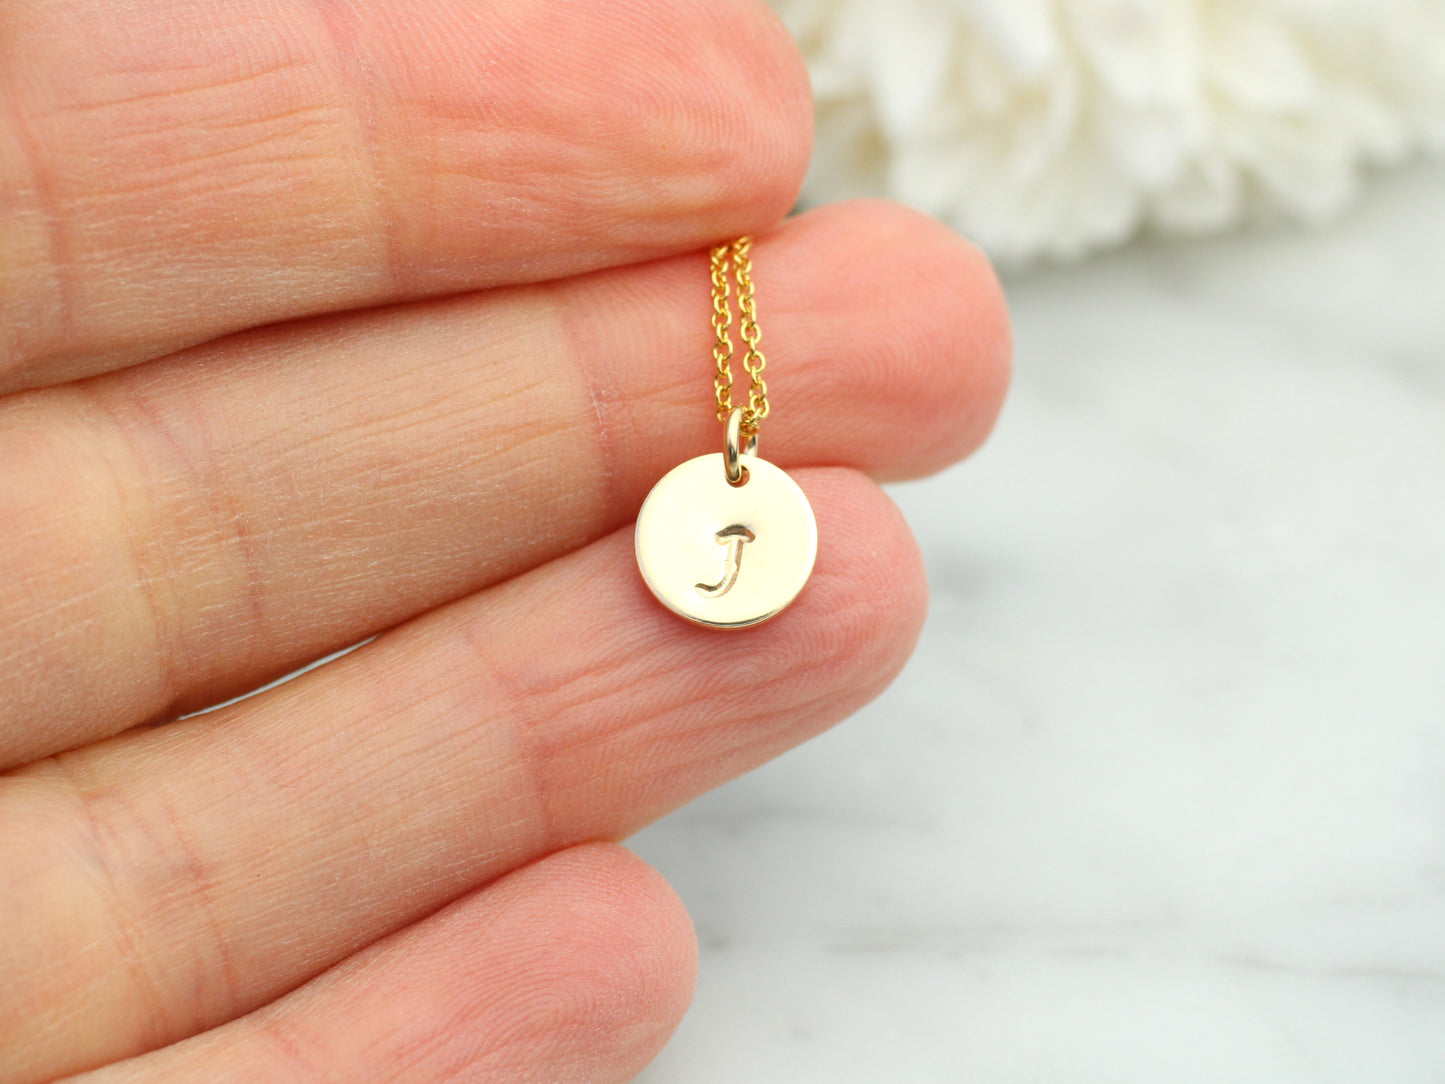 Initial necklace in gold. Valentines day necklace.